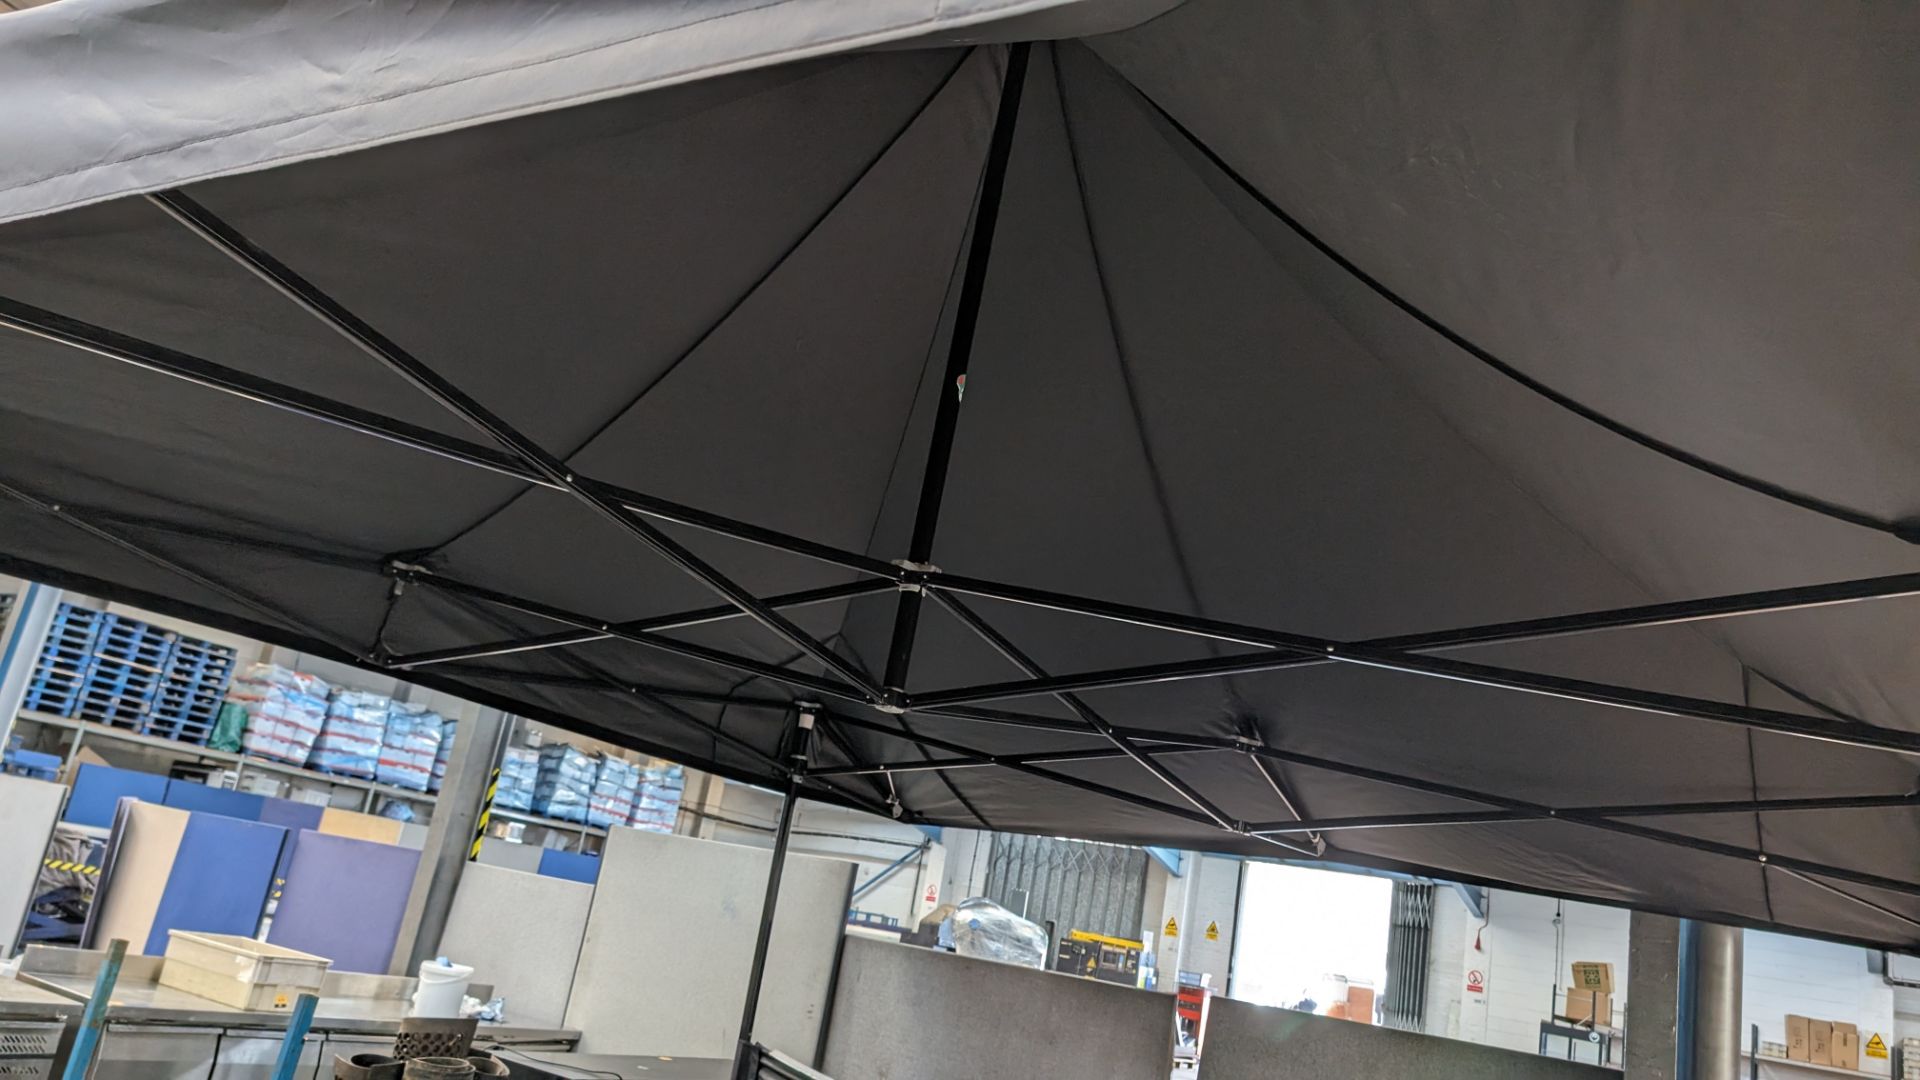 Mastertent 4m x 4m canopy tent (gazebo), bought new in May 2022 for approximately £3,600. This item - Image 12 of 14